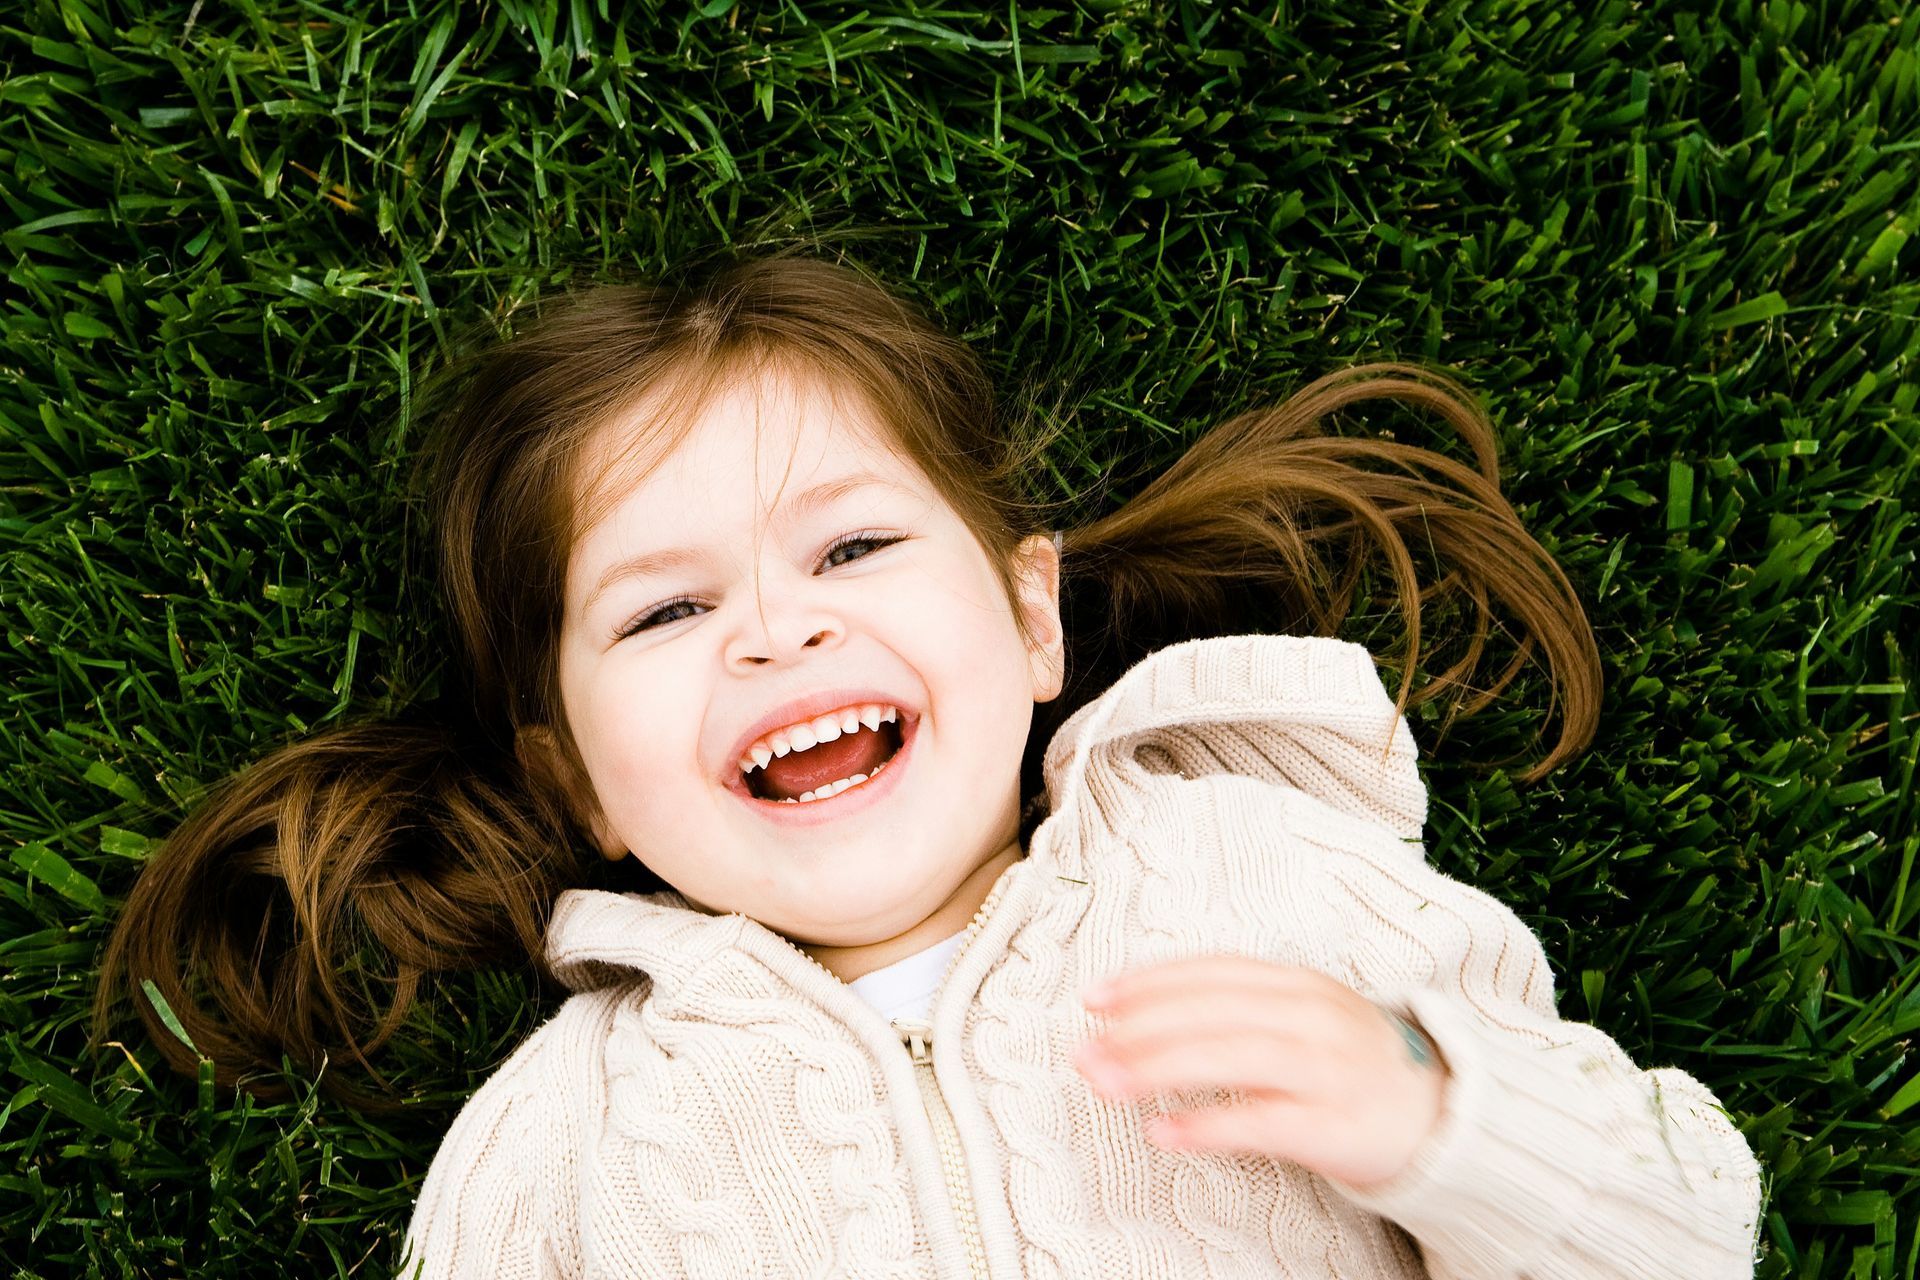 A little girl laying on the grass smiling